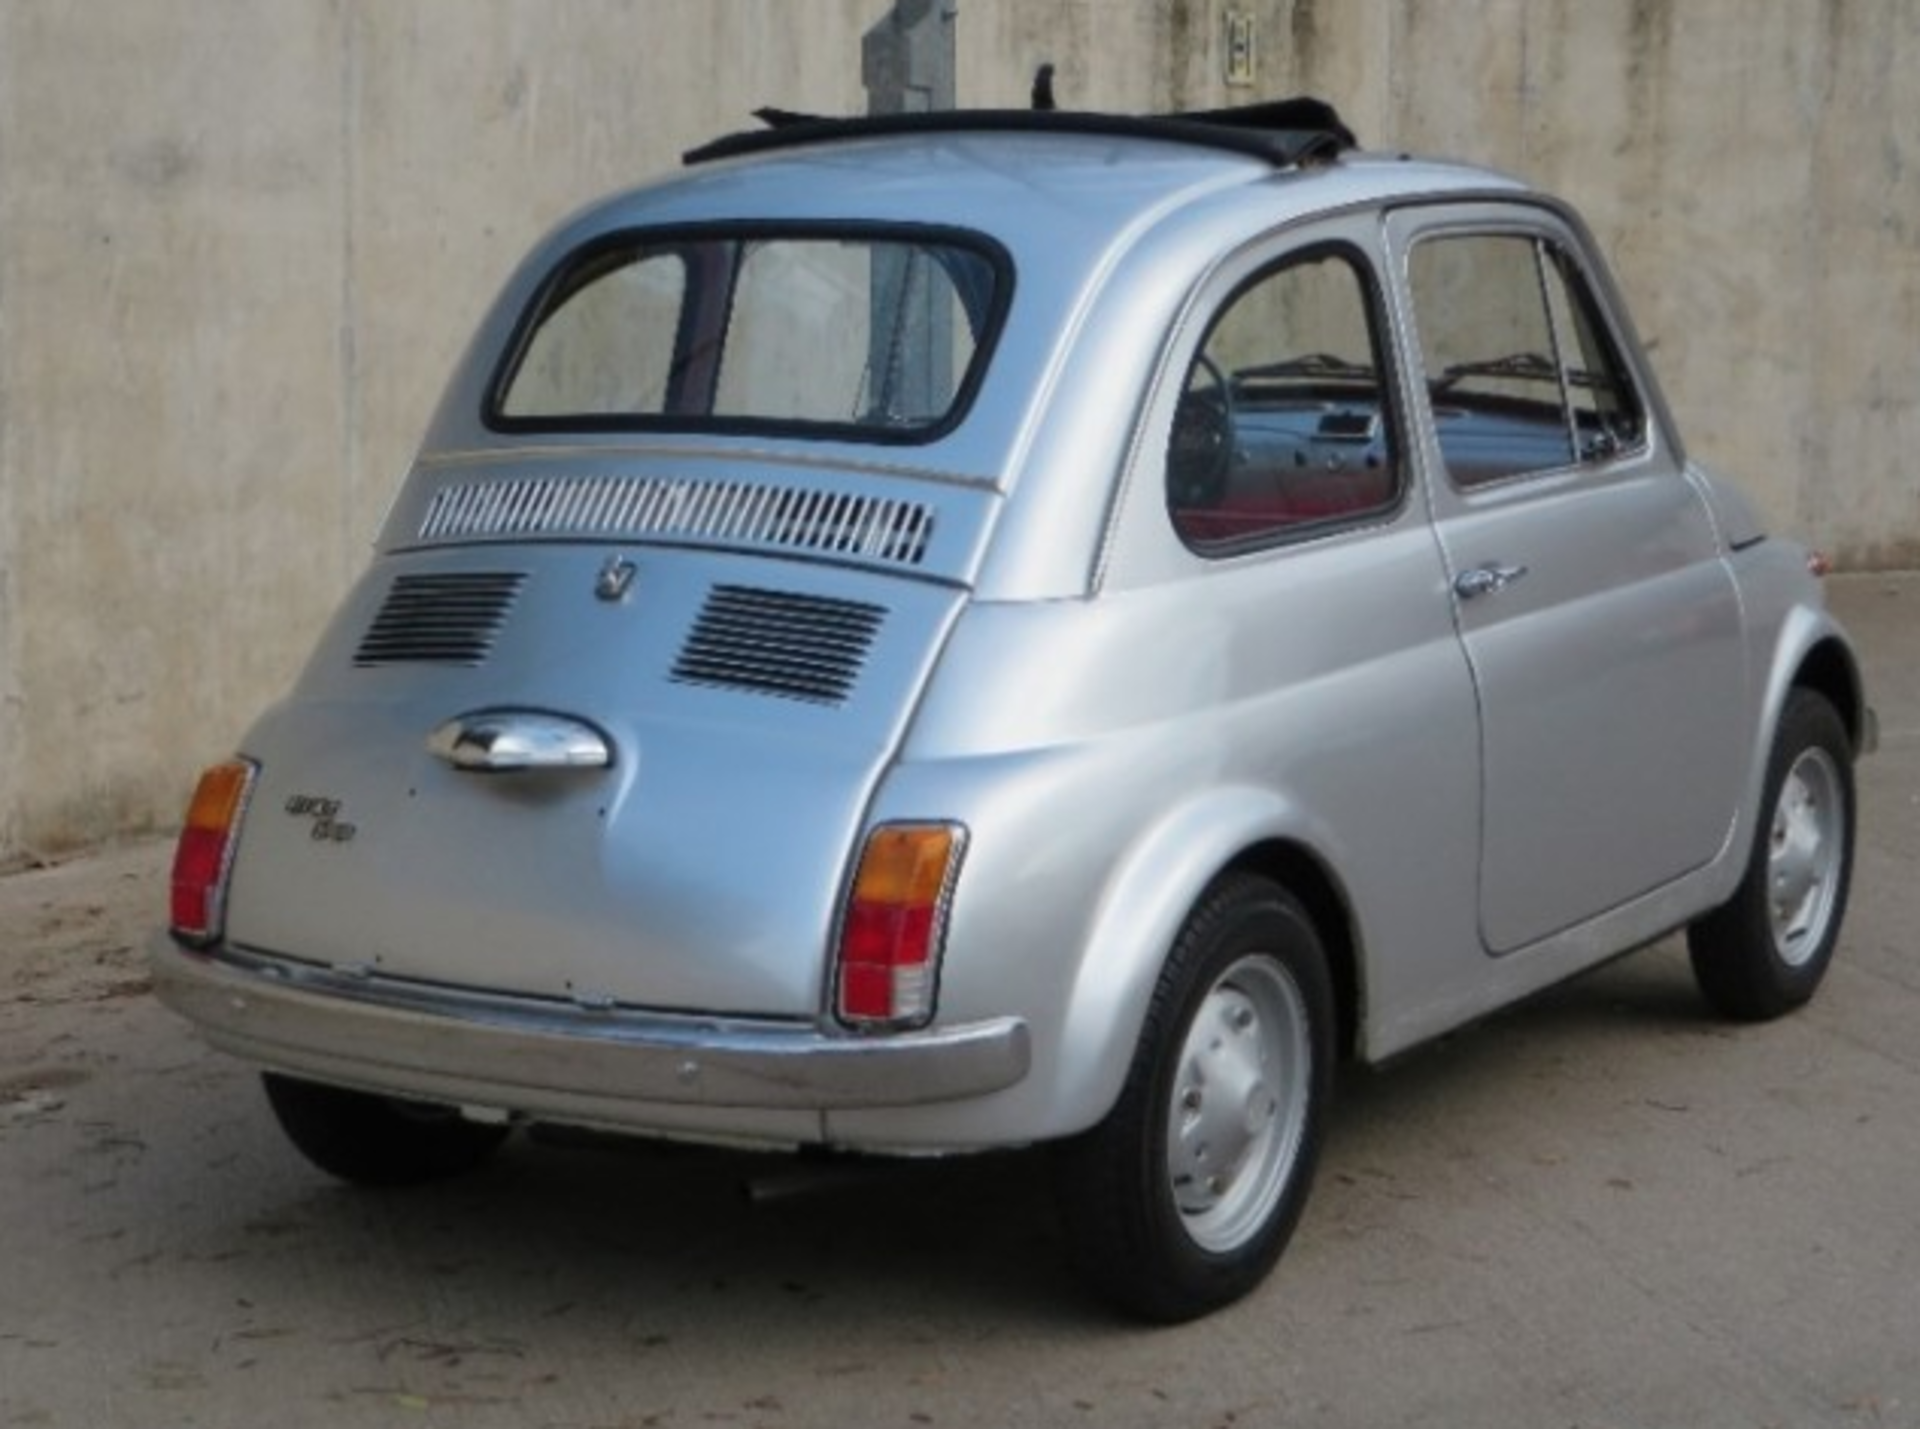 Fiat 500 R-1976. Full Restoration and 8 Kilometres since - Image 4 of 23